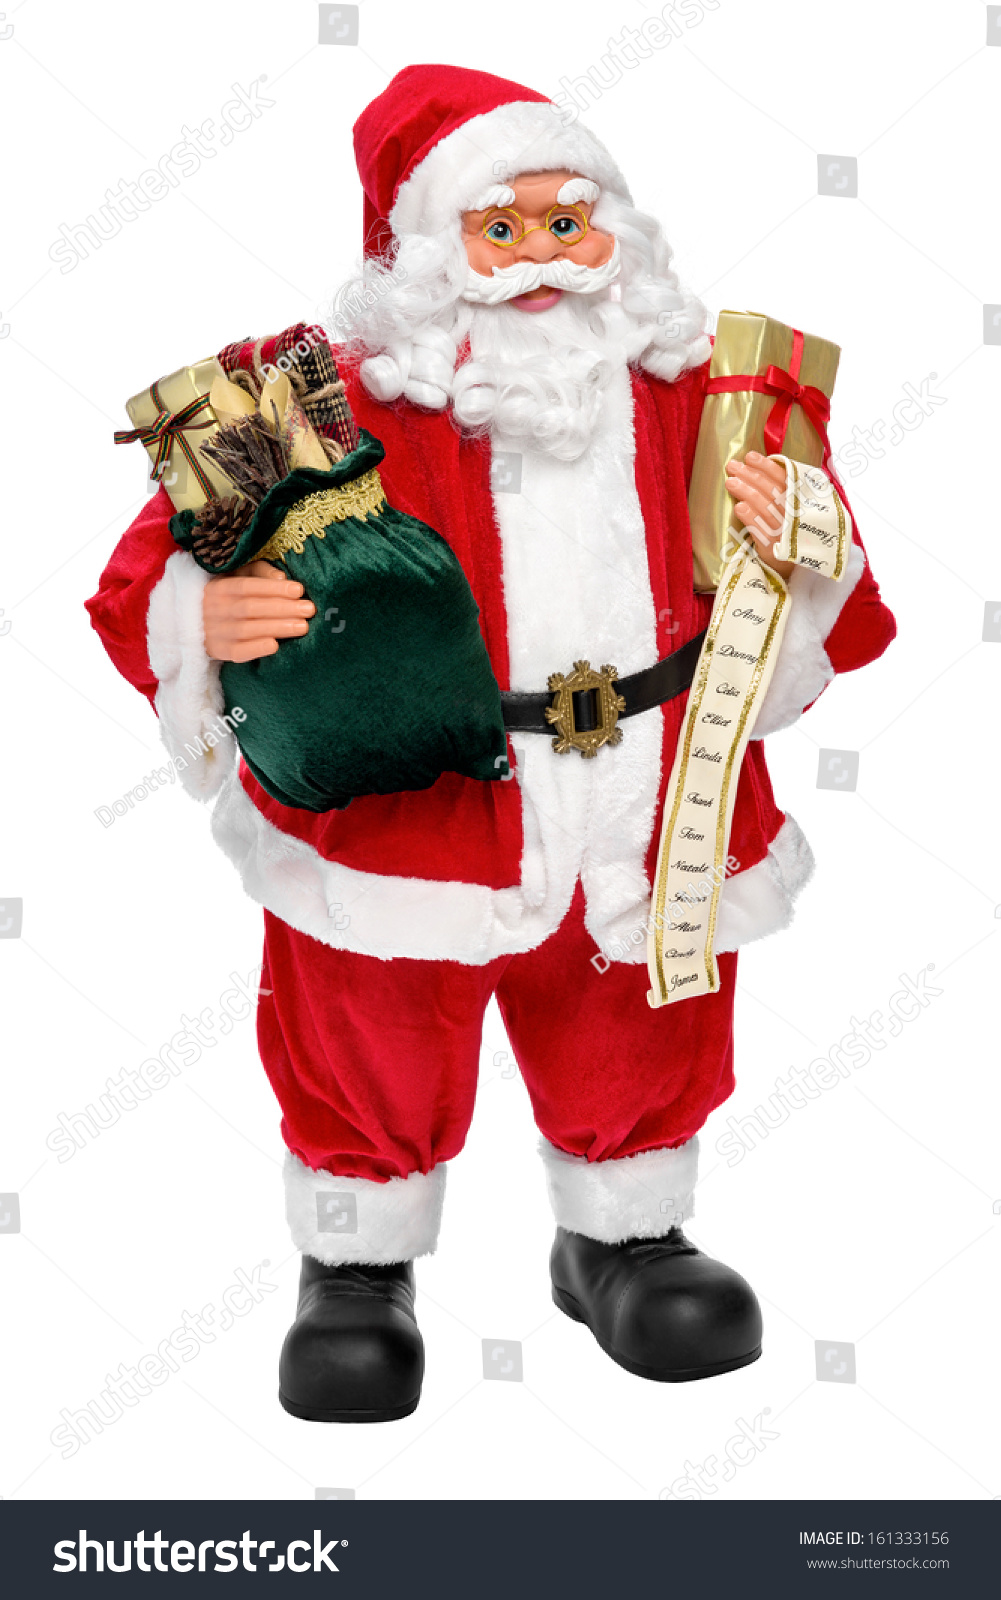 Santa Claus doll with presents and name list, isolated on white background #161333156